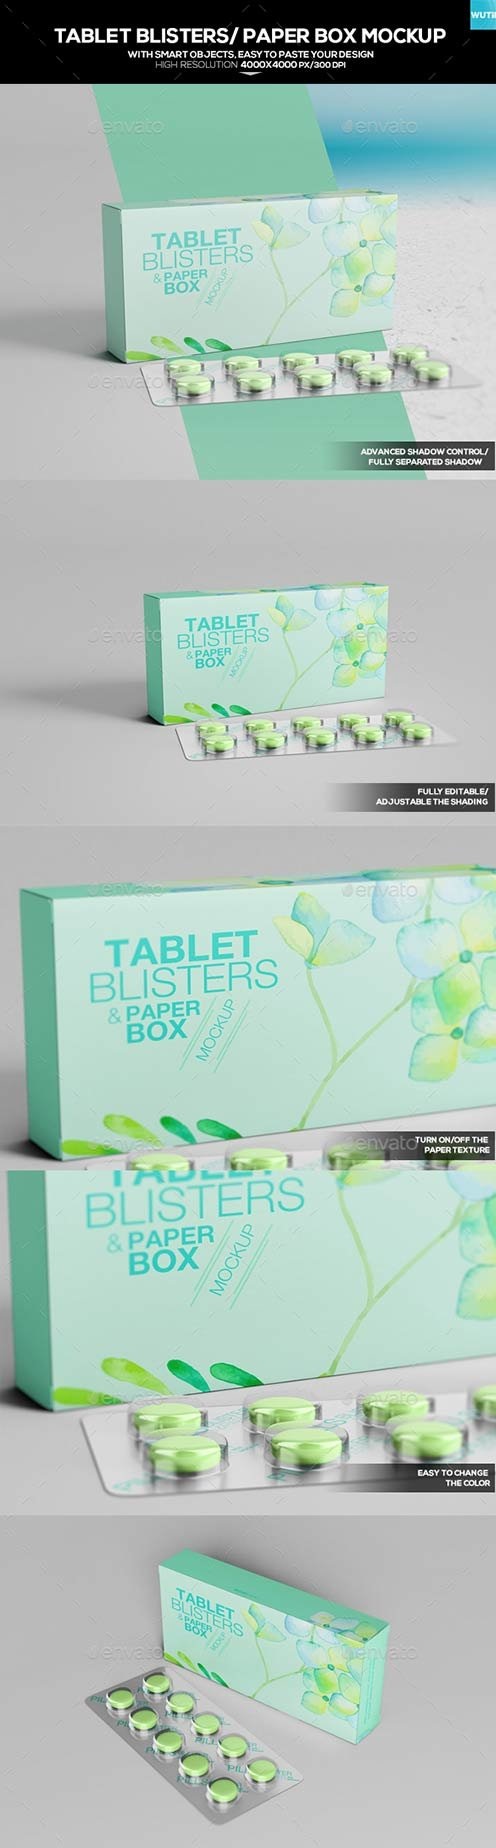 Tablet Blisters/ Paper Box Mockup 20140915